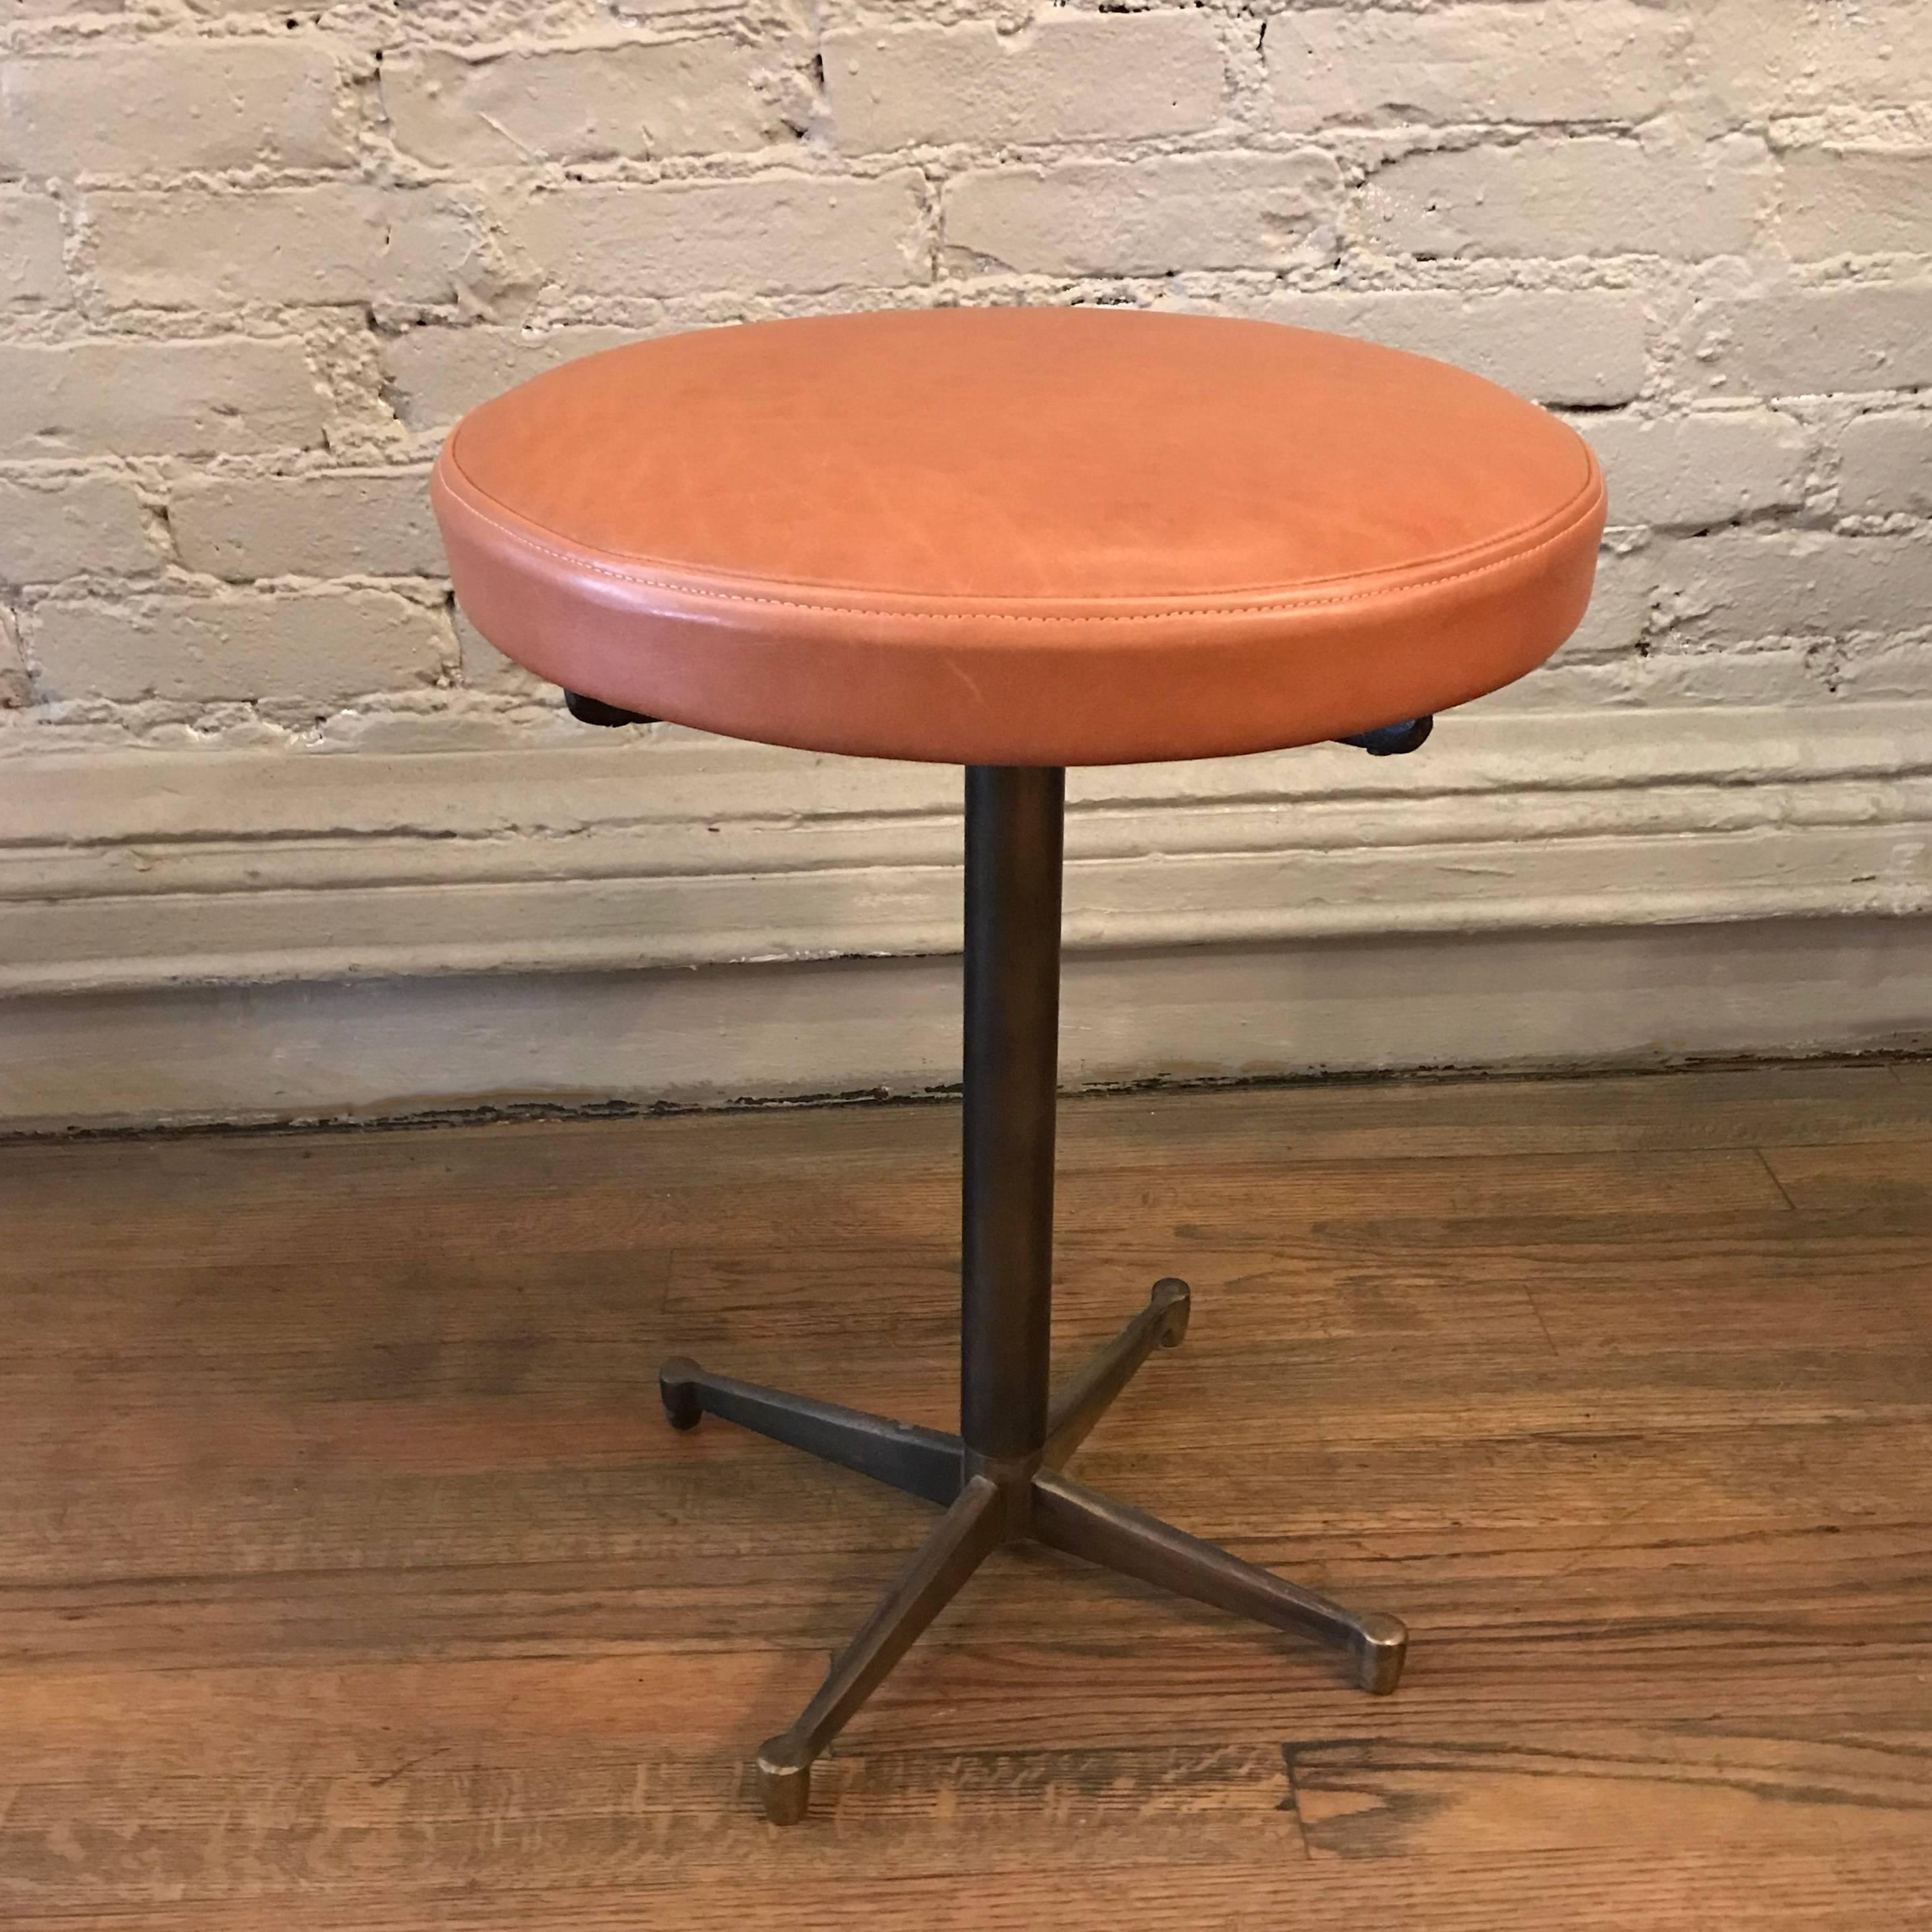 Mid-Century Modern, French, vanity stool features a finely made, minimal bronze base with a newly upholstered swivel seat in tan luggage leather.